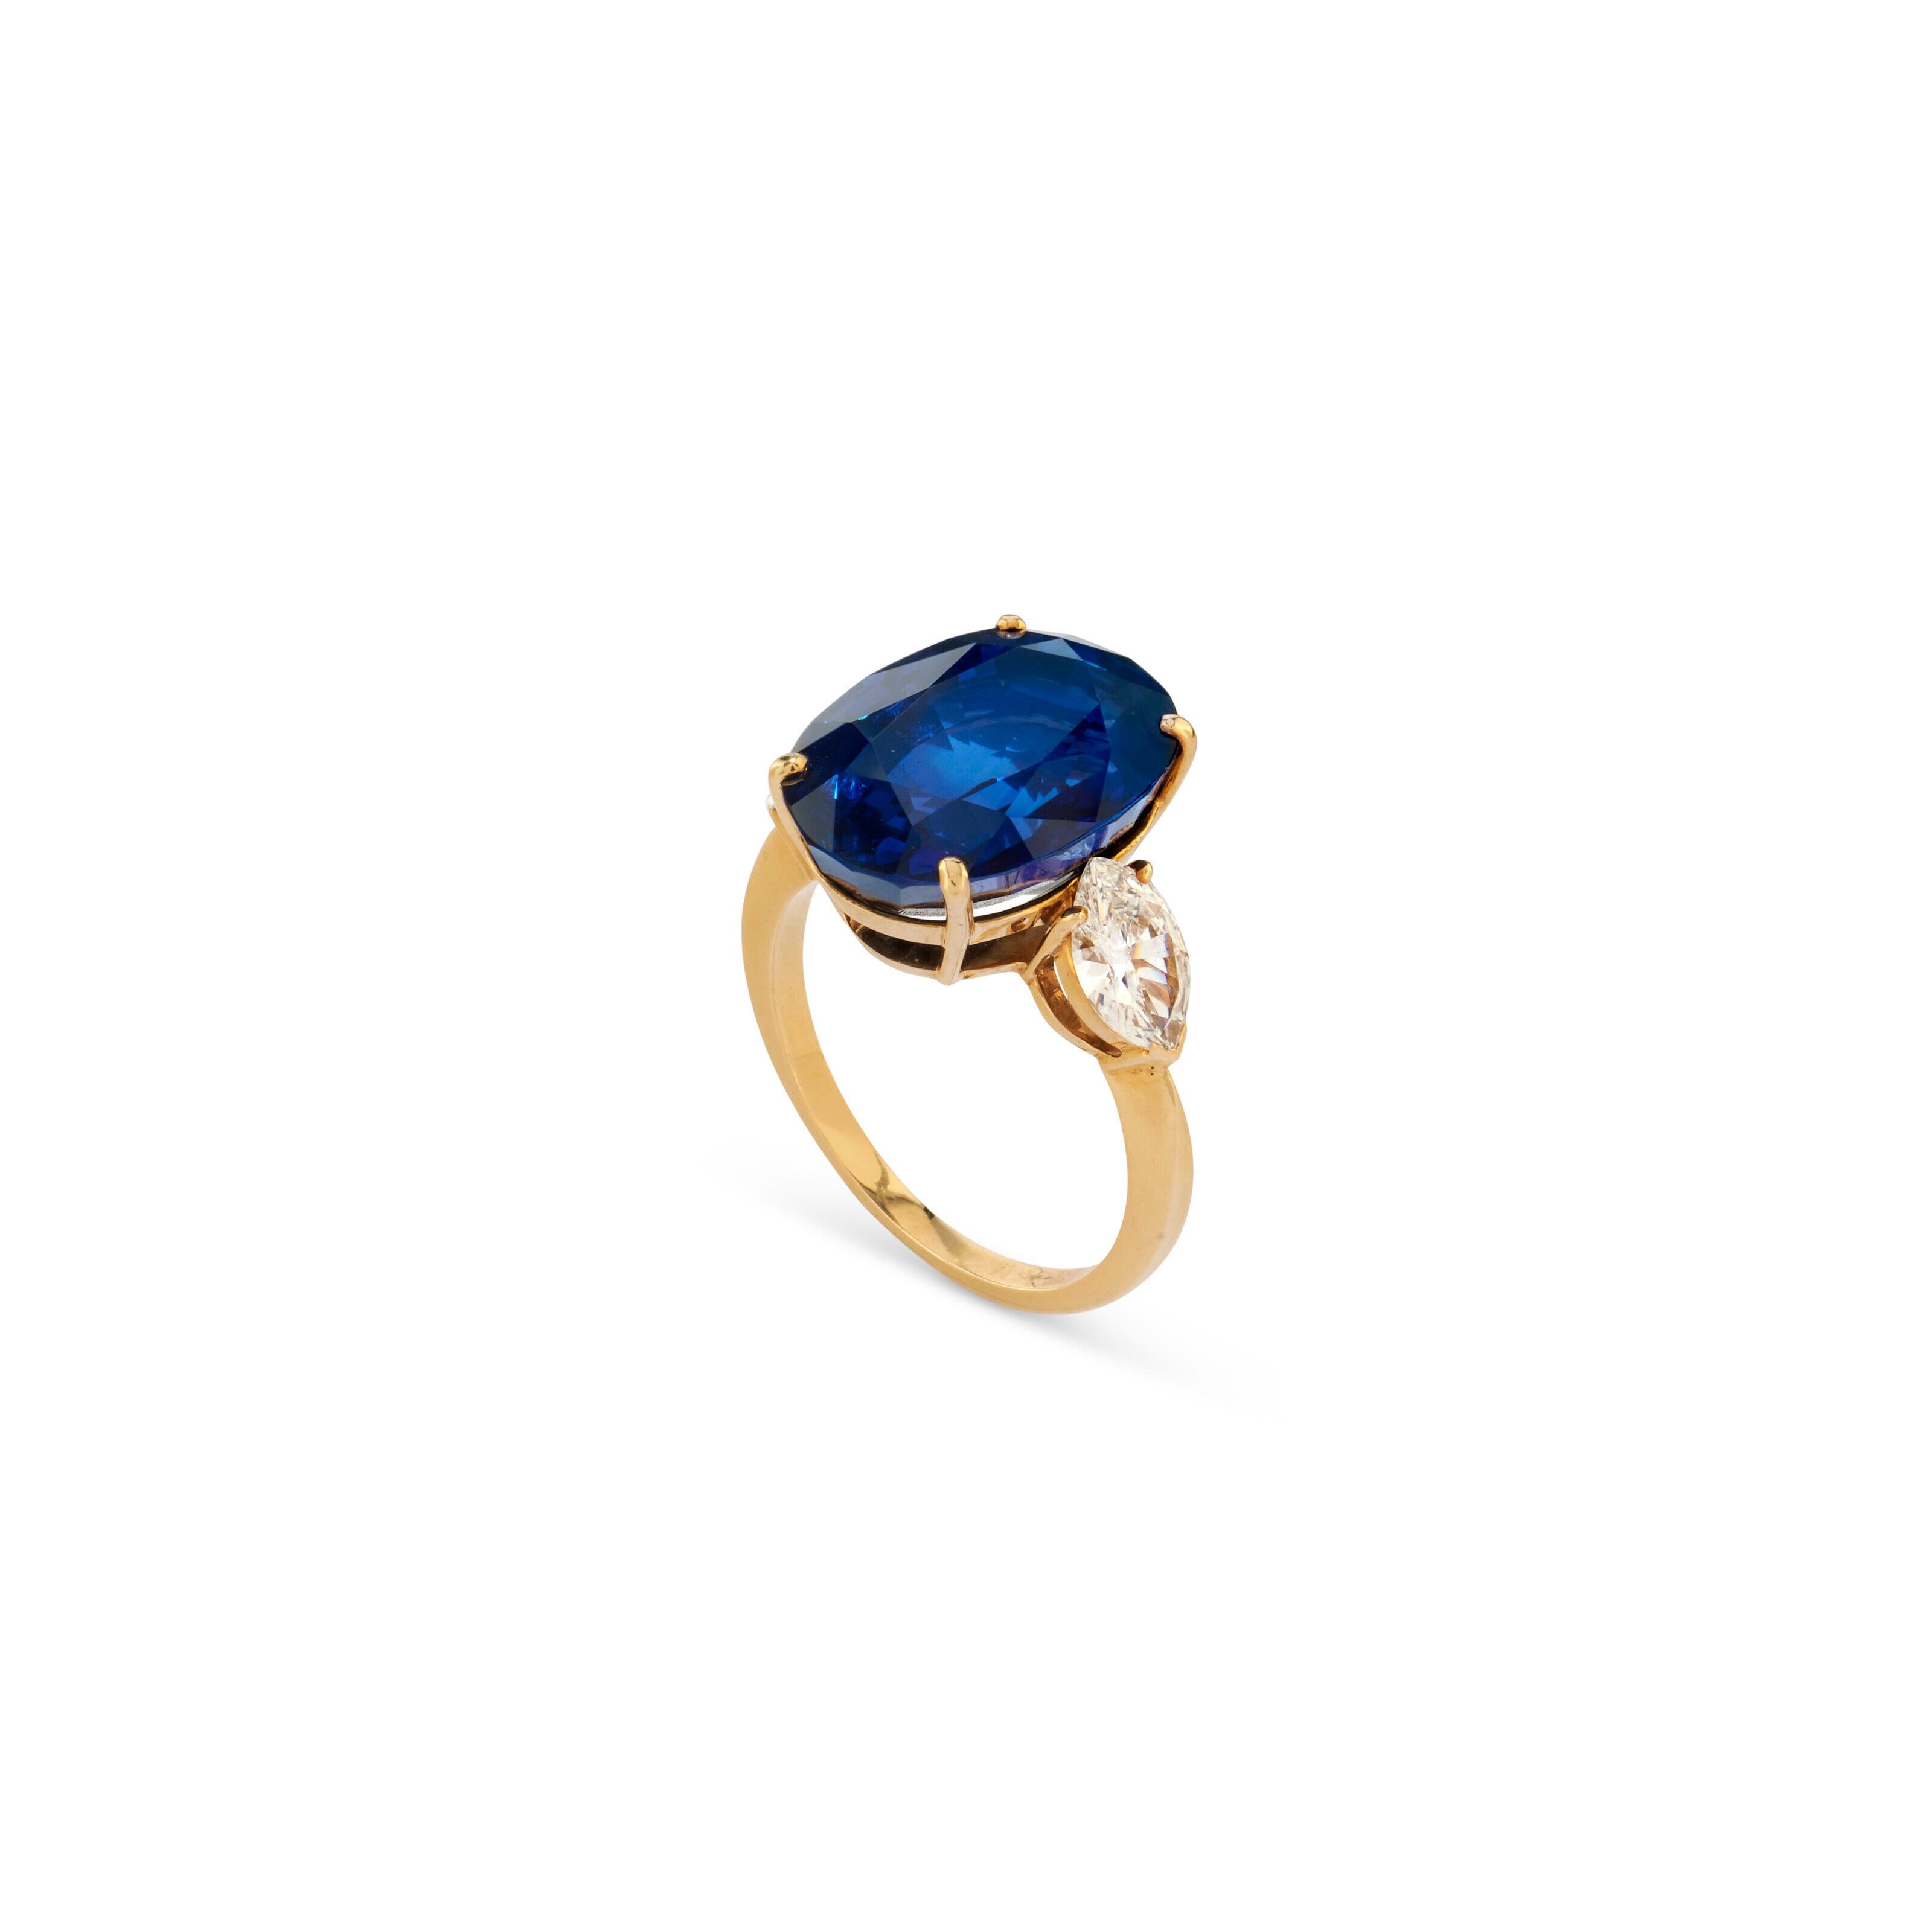 Oval-shaped sapphire weighing approximately 11.00 Carats flanked by marquise-shaped diamonds weighing 1.10 Carats

Heated Sapphire

Set in 18 Karat Yellow Gold